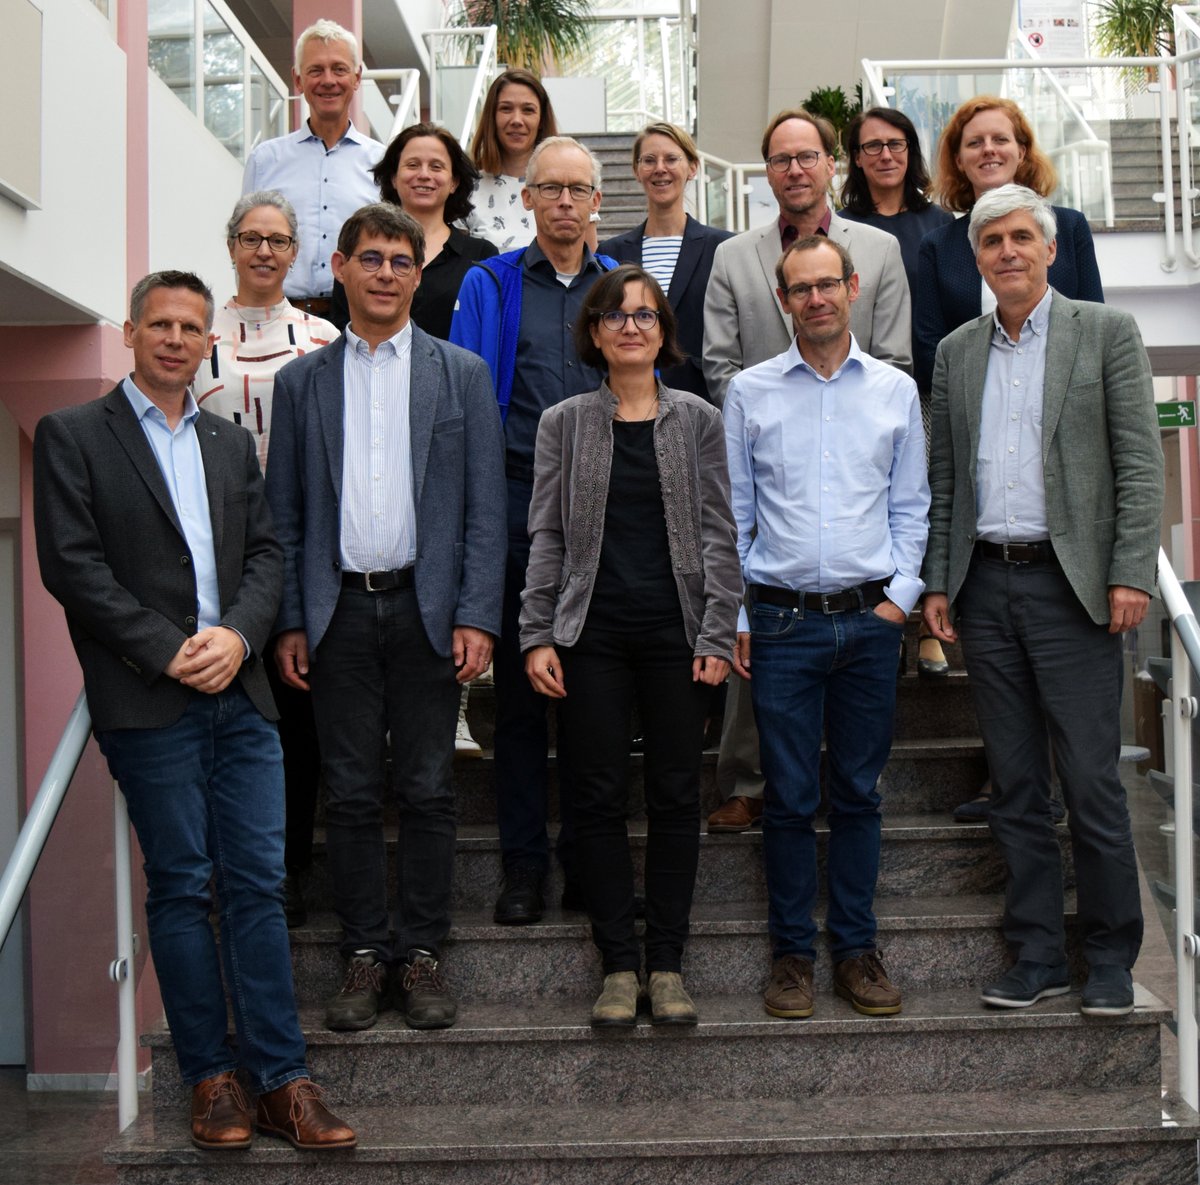 Colleagues from eight Leibniz institutes and from @LeibnizWGL headquarters are gathering at ZMT today for the meeting of Leibniz Section E 'Environmental Sciences' with some also joining online. We are happy to be your hosts for the day. Welcome to ZMT!